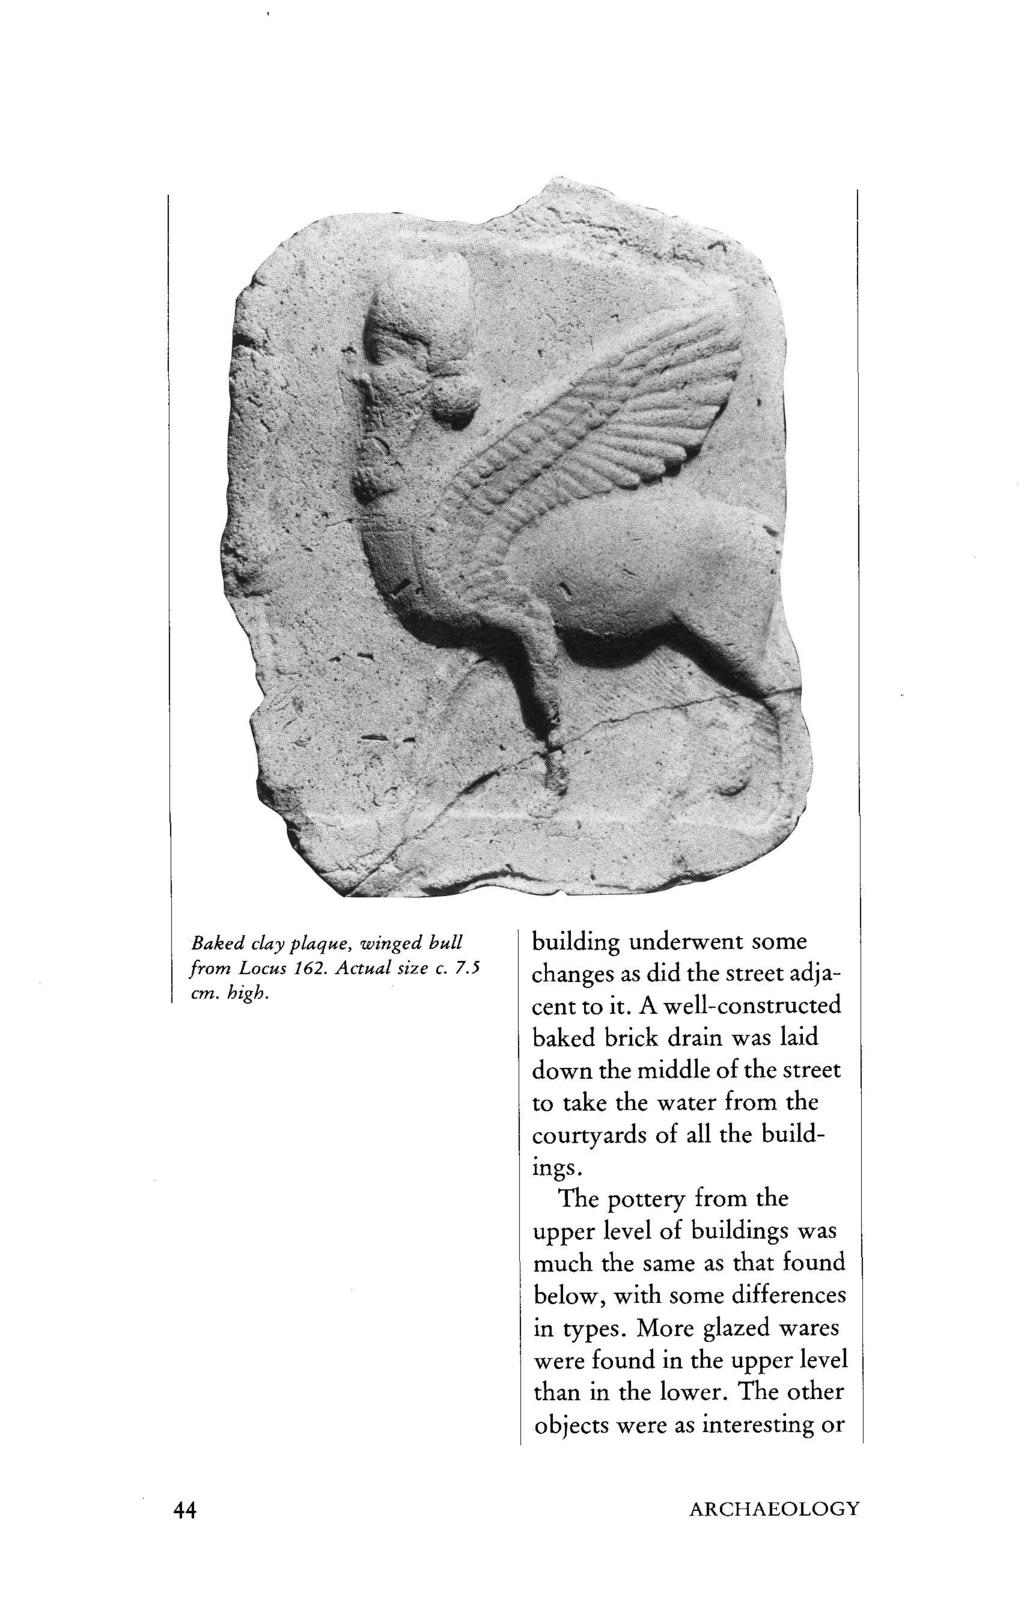 Baked clay plaque, winged bull from Locus 162. Actual size c. 7.5 cm. high. building underwent some changes as did the street adjacent to it.